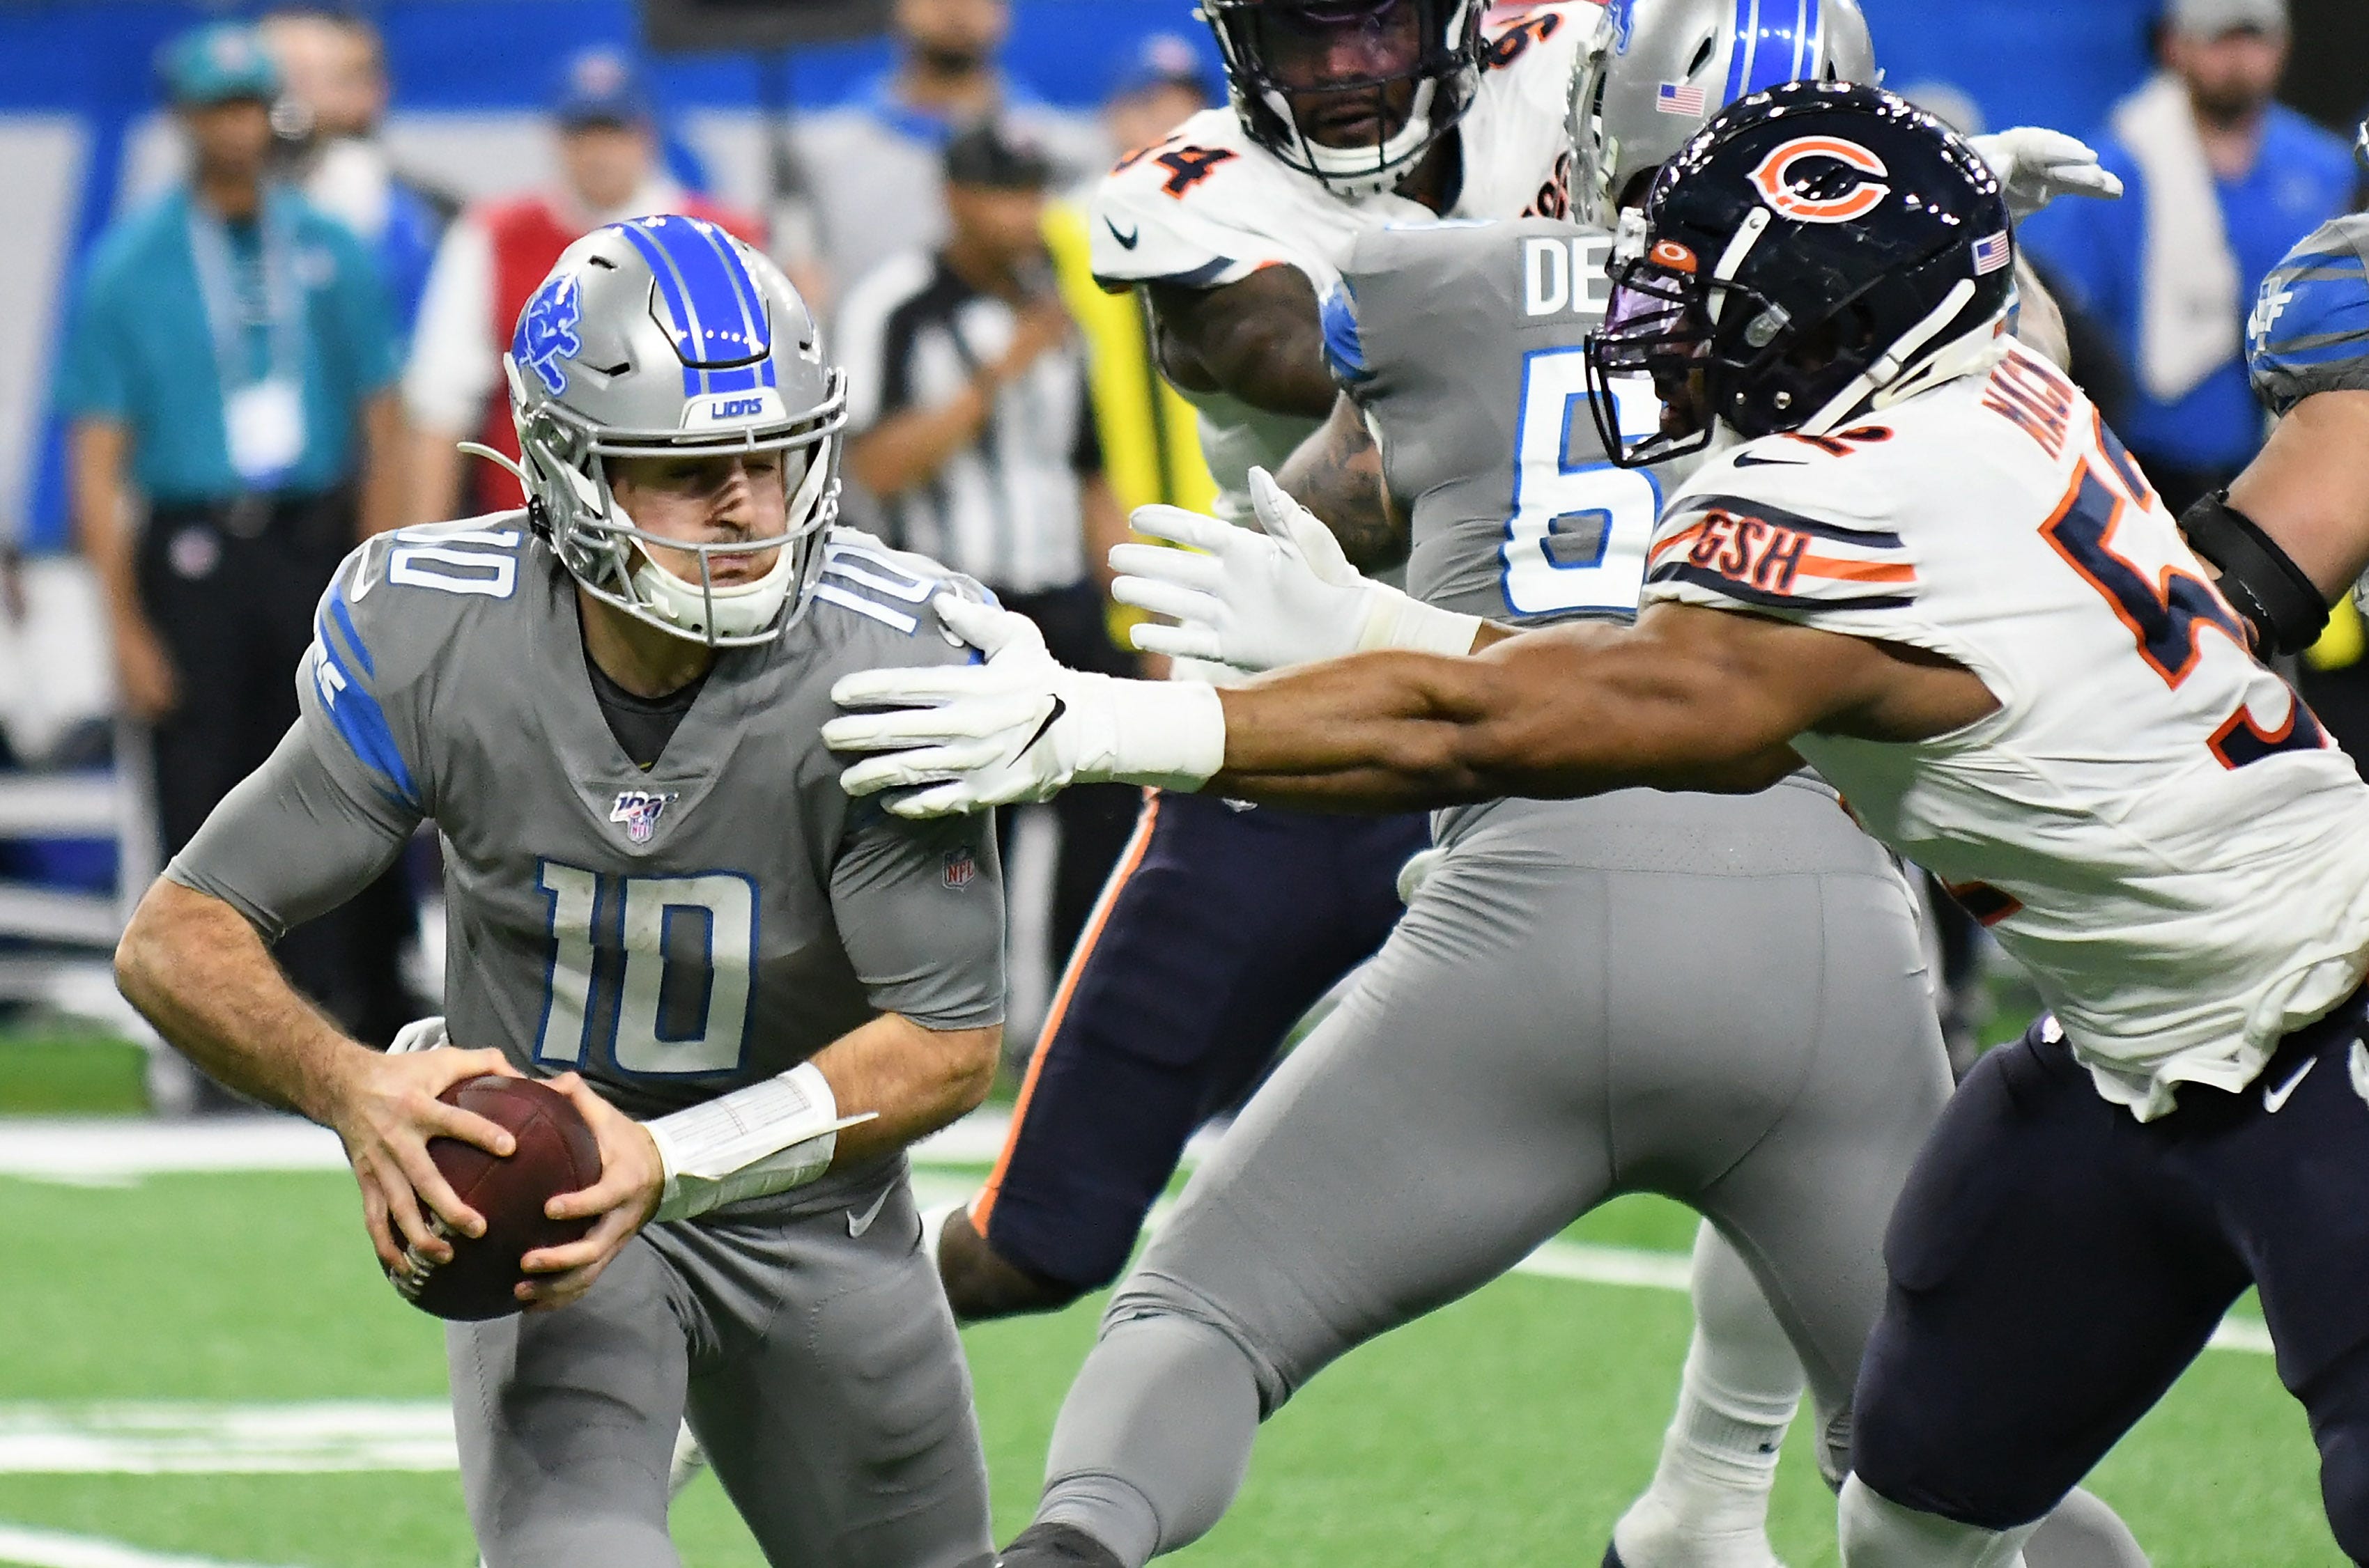 OFFENSE: David Blough, quarterback: Things started so promising for Blough when he led the Lions to touchdowns his first two drives. But from there, he looked more and more like an undrafted rookie, often struggling to get a single first down on many possessions. He completed just 54% of his throws, with more picks than scores, while lacking dual-threat ability to offset the paltry passing figures. Grade: D